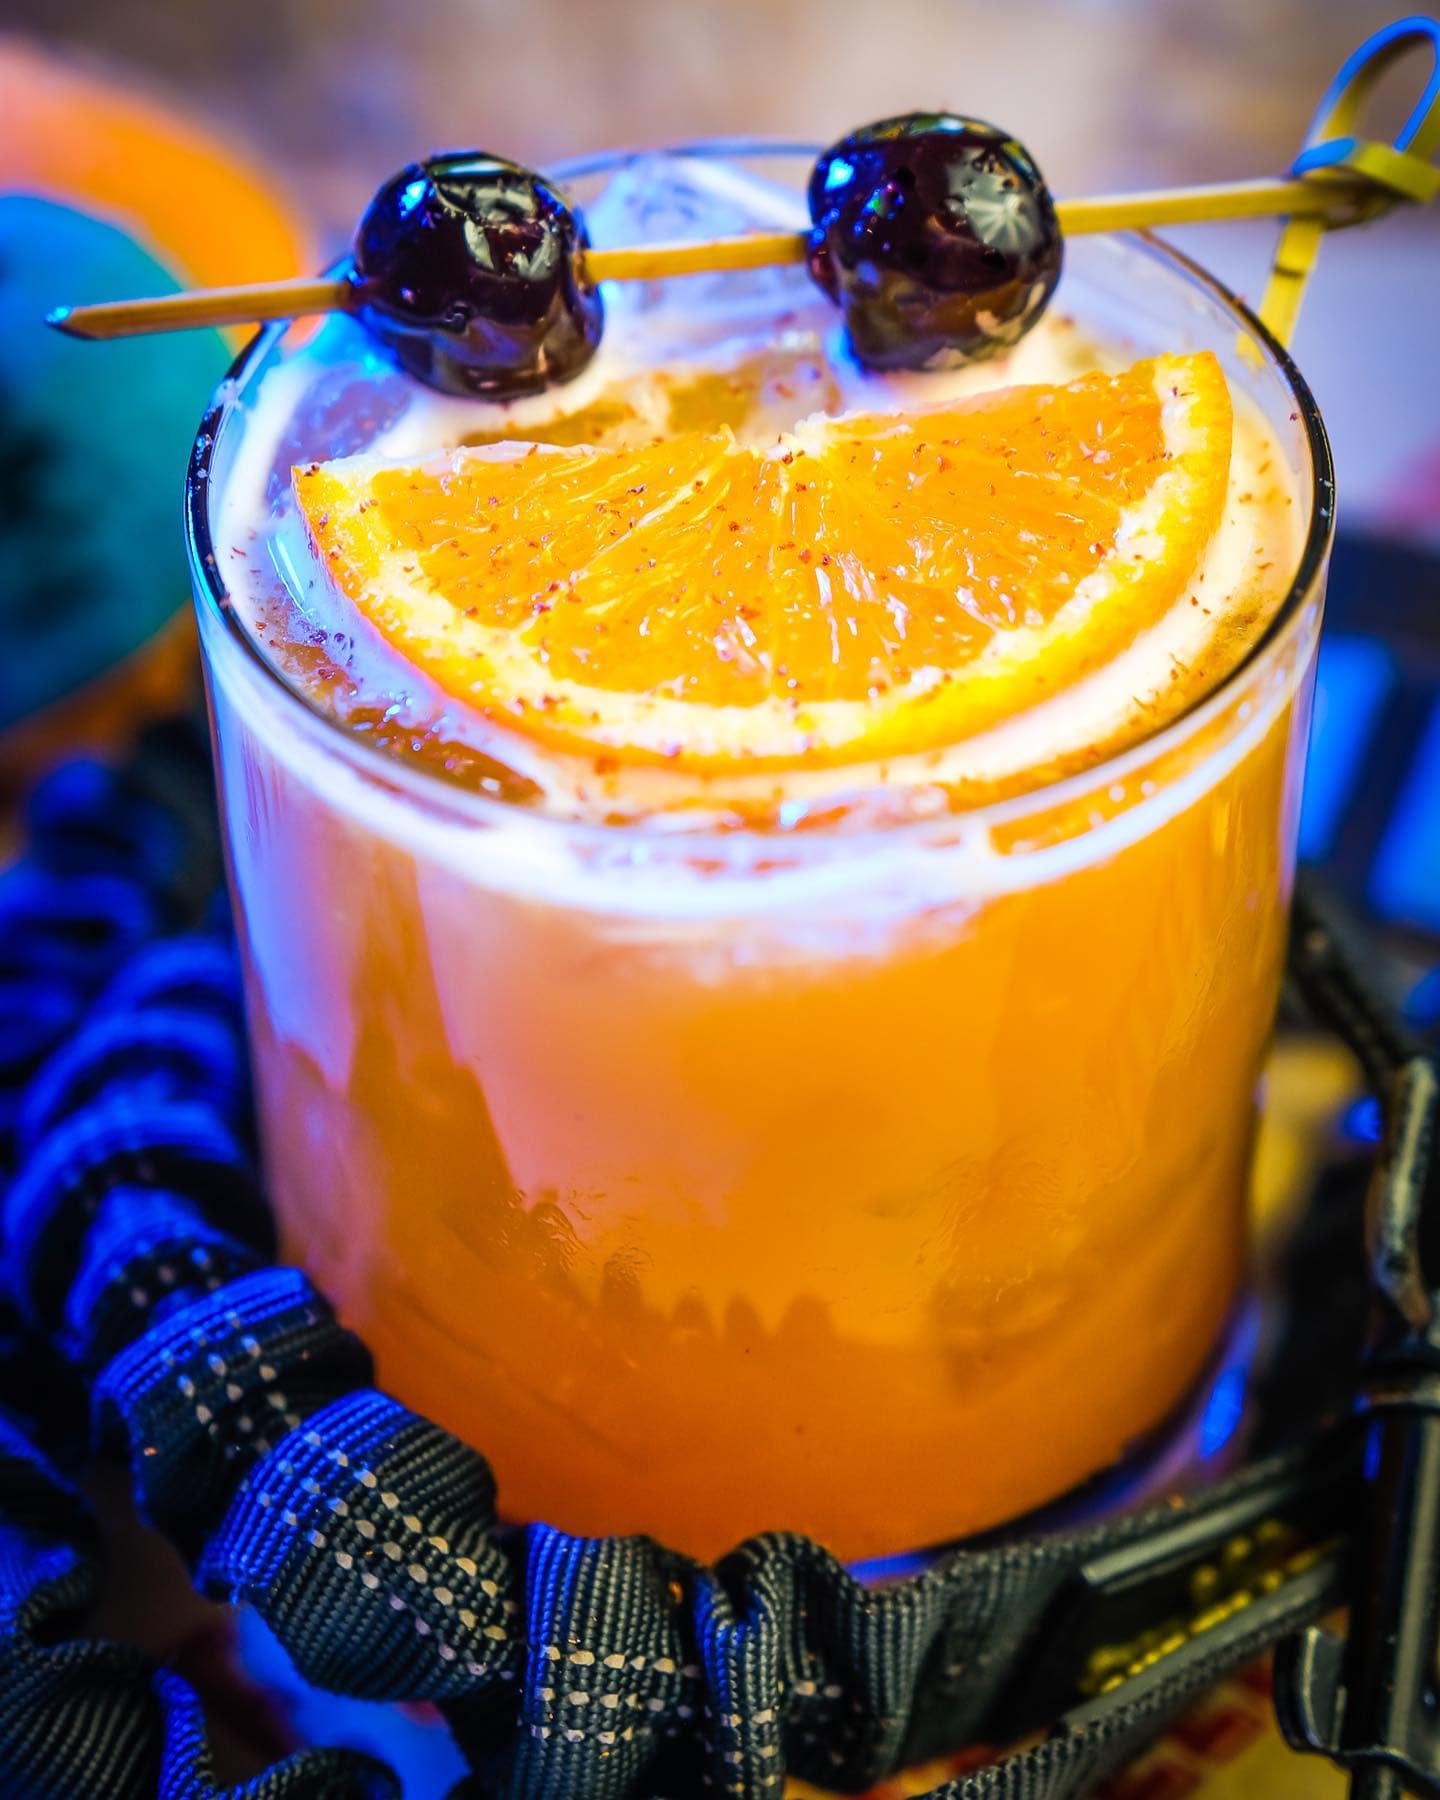 A bright orange cocktail in a lowball glass, garnished with an orange wedge and two maraschino cherries on a skewer